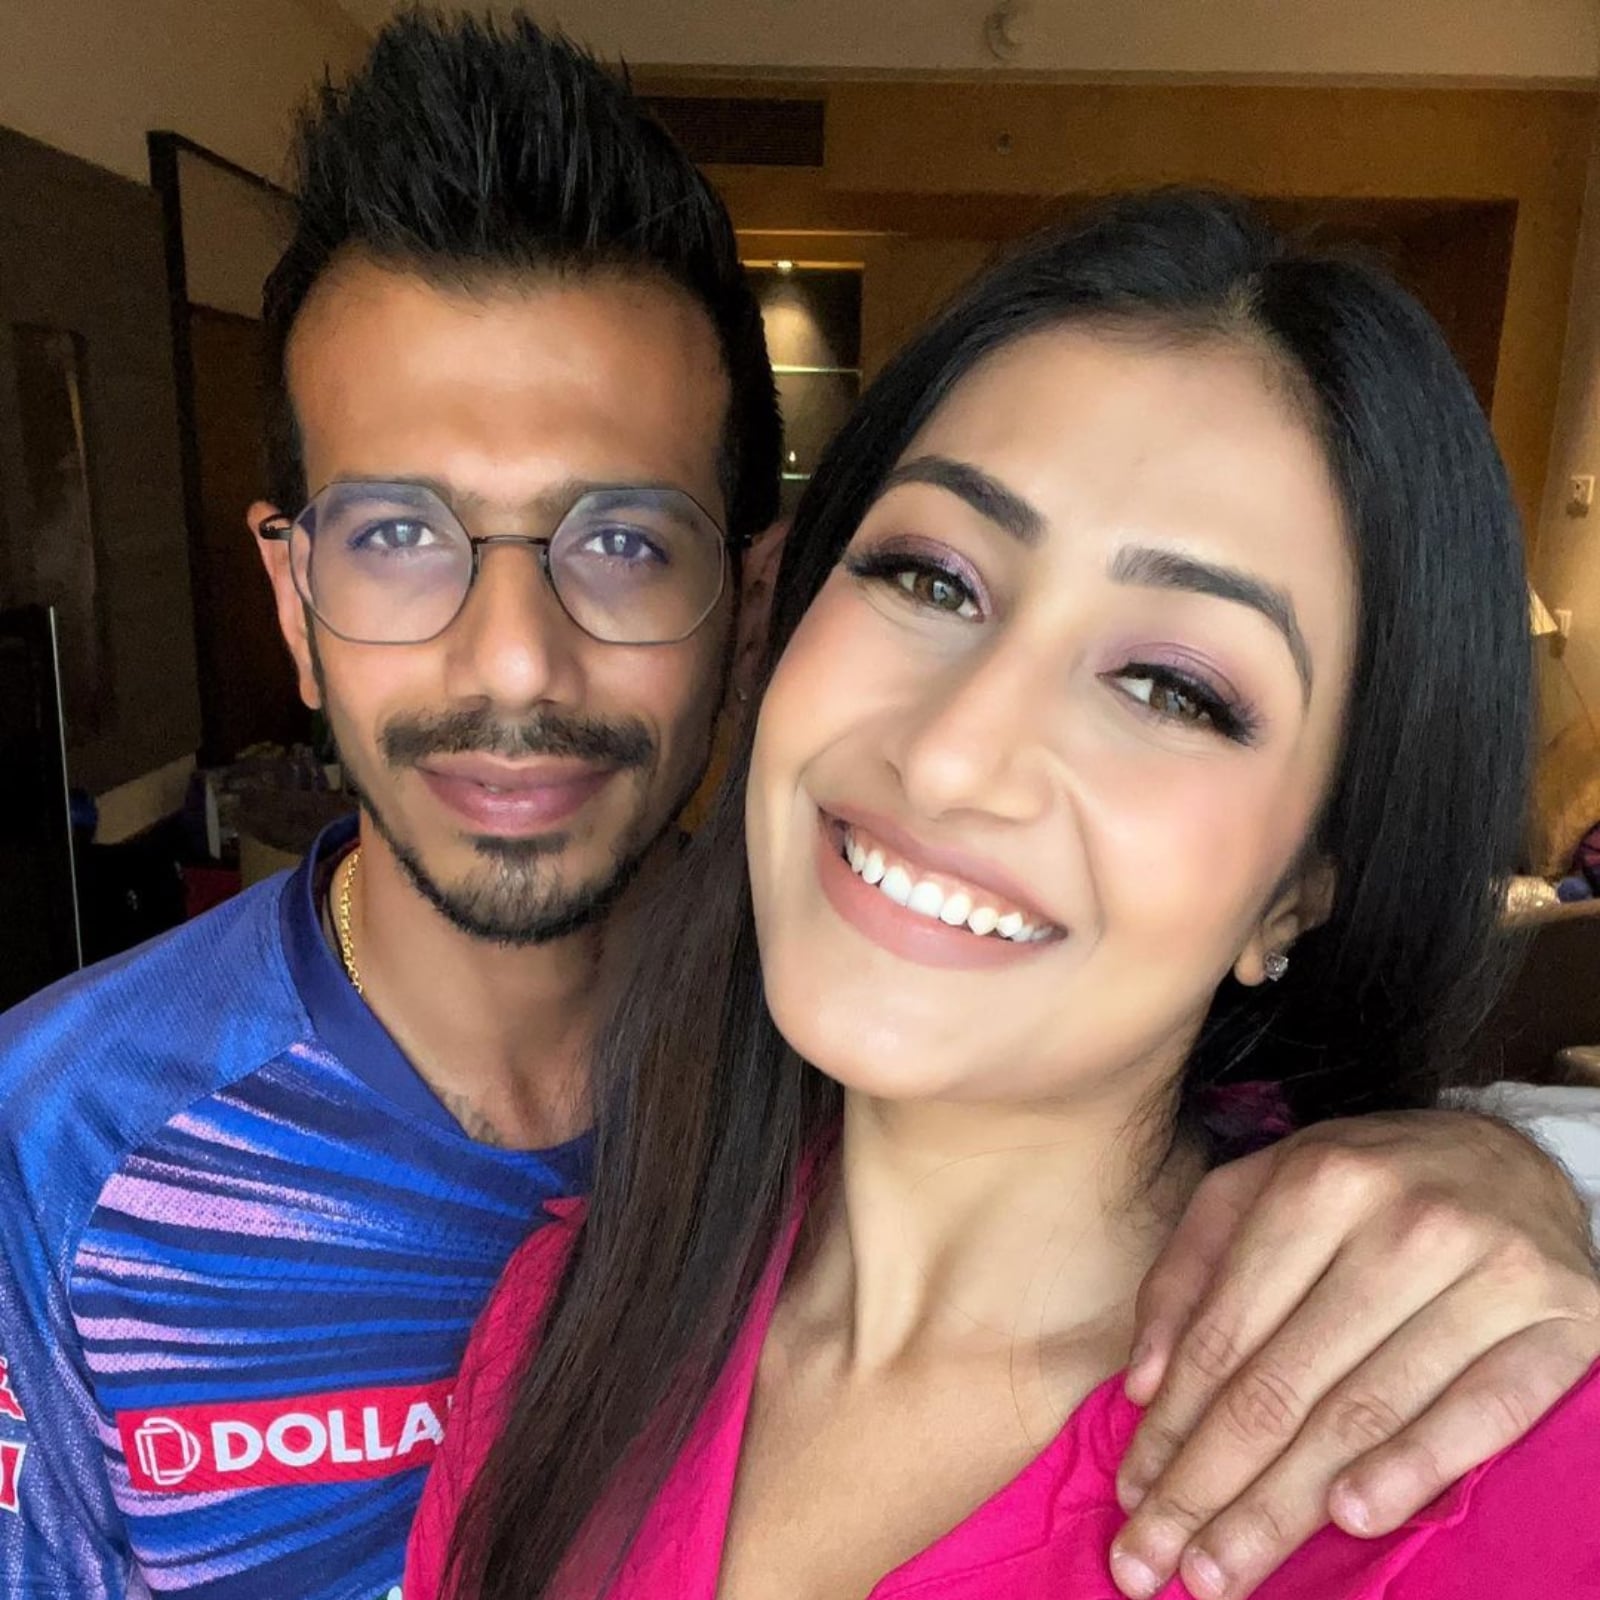 Pretty Hateful': Dhanashree Verma Opens up on 'Hurtful' Rumours About Separation From Yuzvendra Chahal - News18